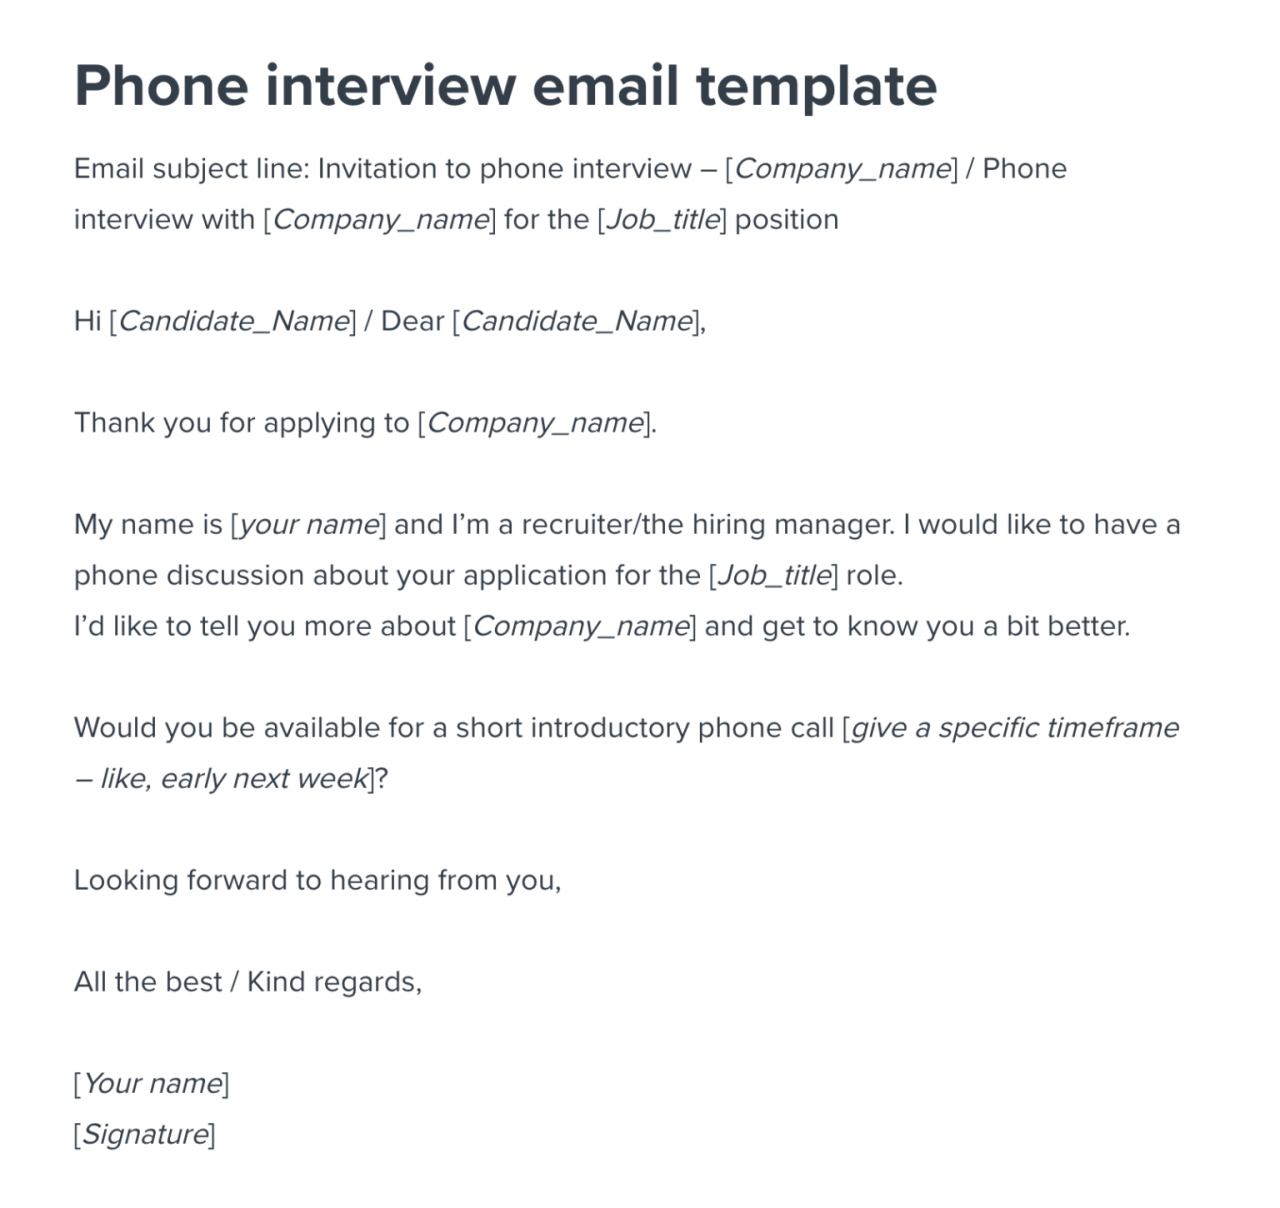 Accepting an invitation to interview